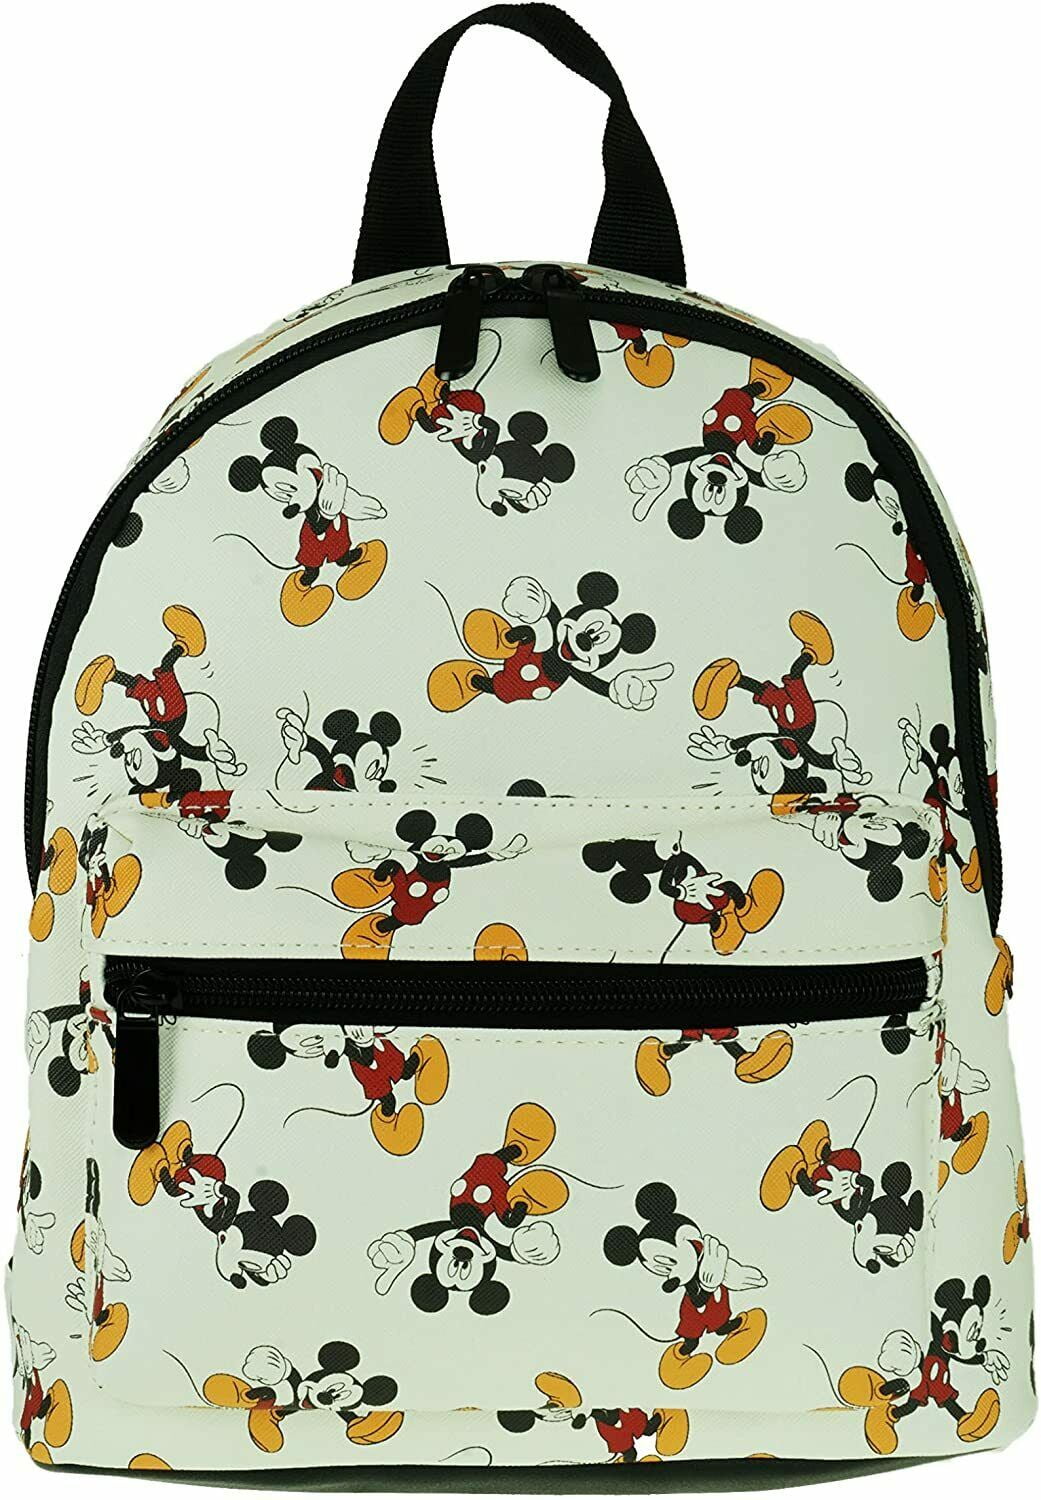 Disney Mickey Mouse Collectible Mini Backpack Purse Bag with Ears NWT | eBay